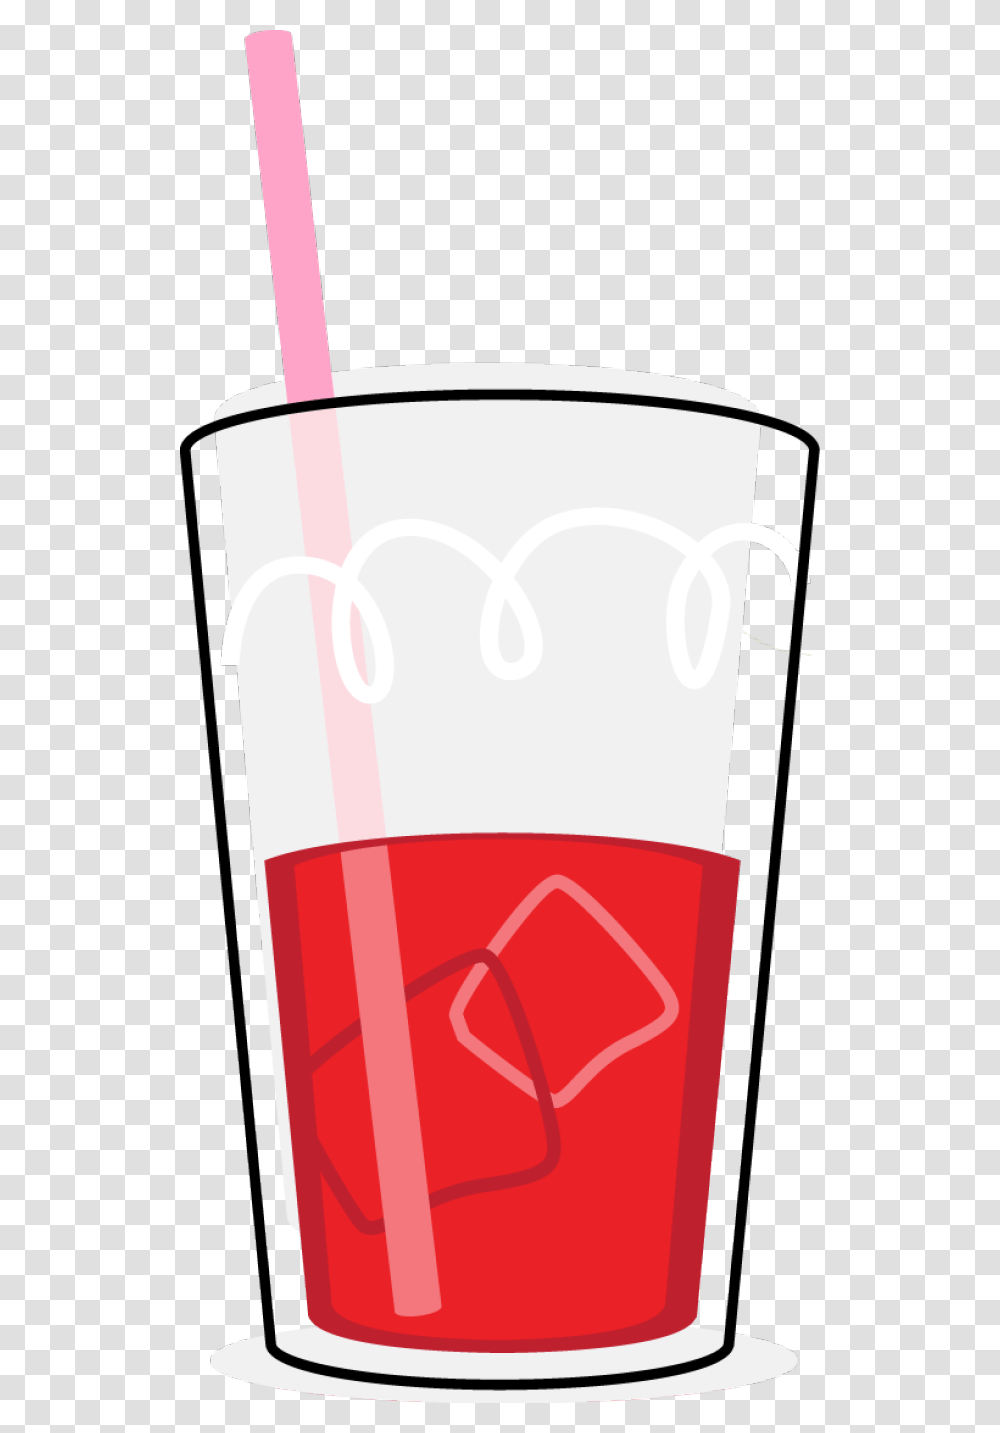 Kool Aid Clip Art Clipart Images Gallery For Free Download Kool Aid Clipart, Bottle, Beverage, Cup, Soda Transparent Png